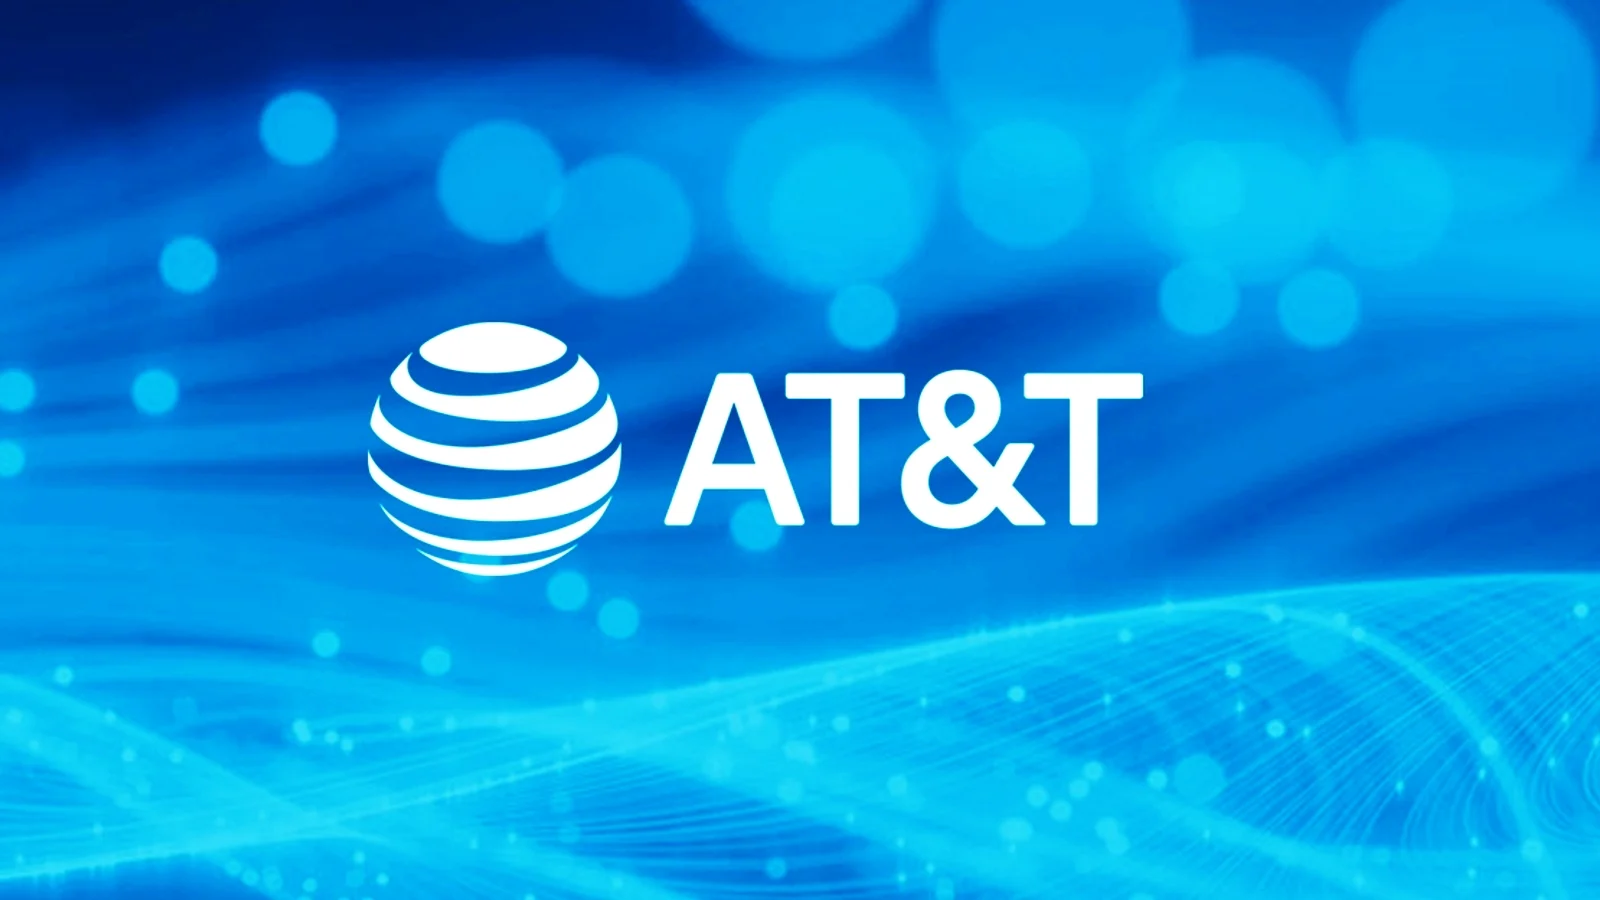 AT&T Data Breach What You Need to Know